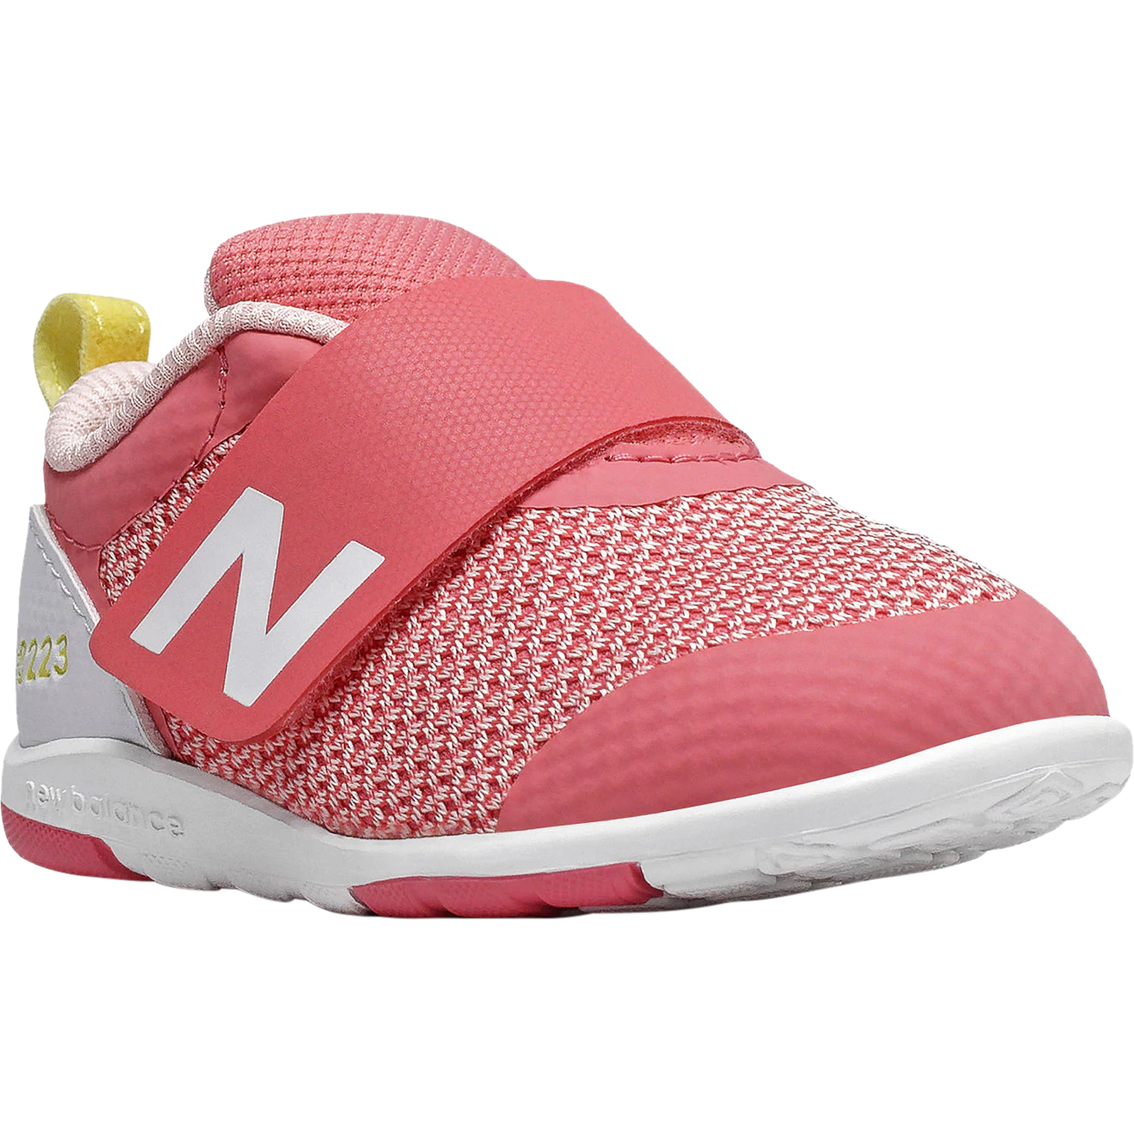 toddler new balance shoes